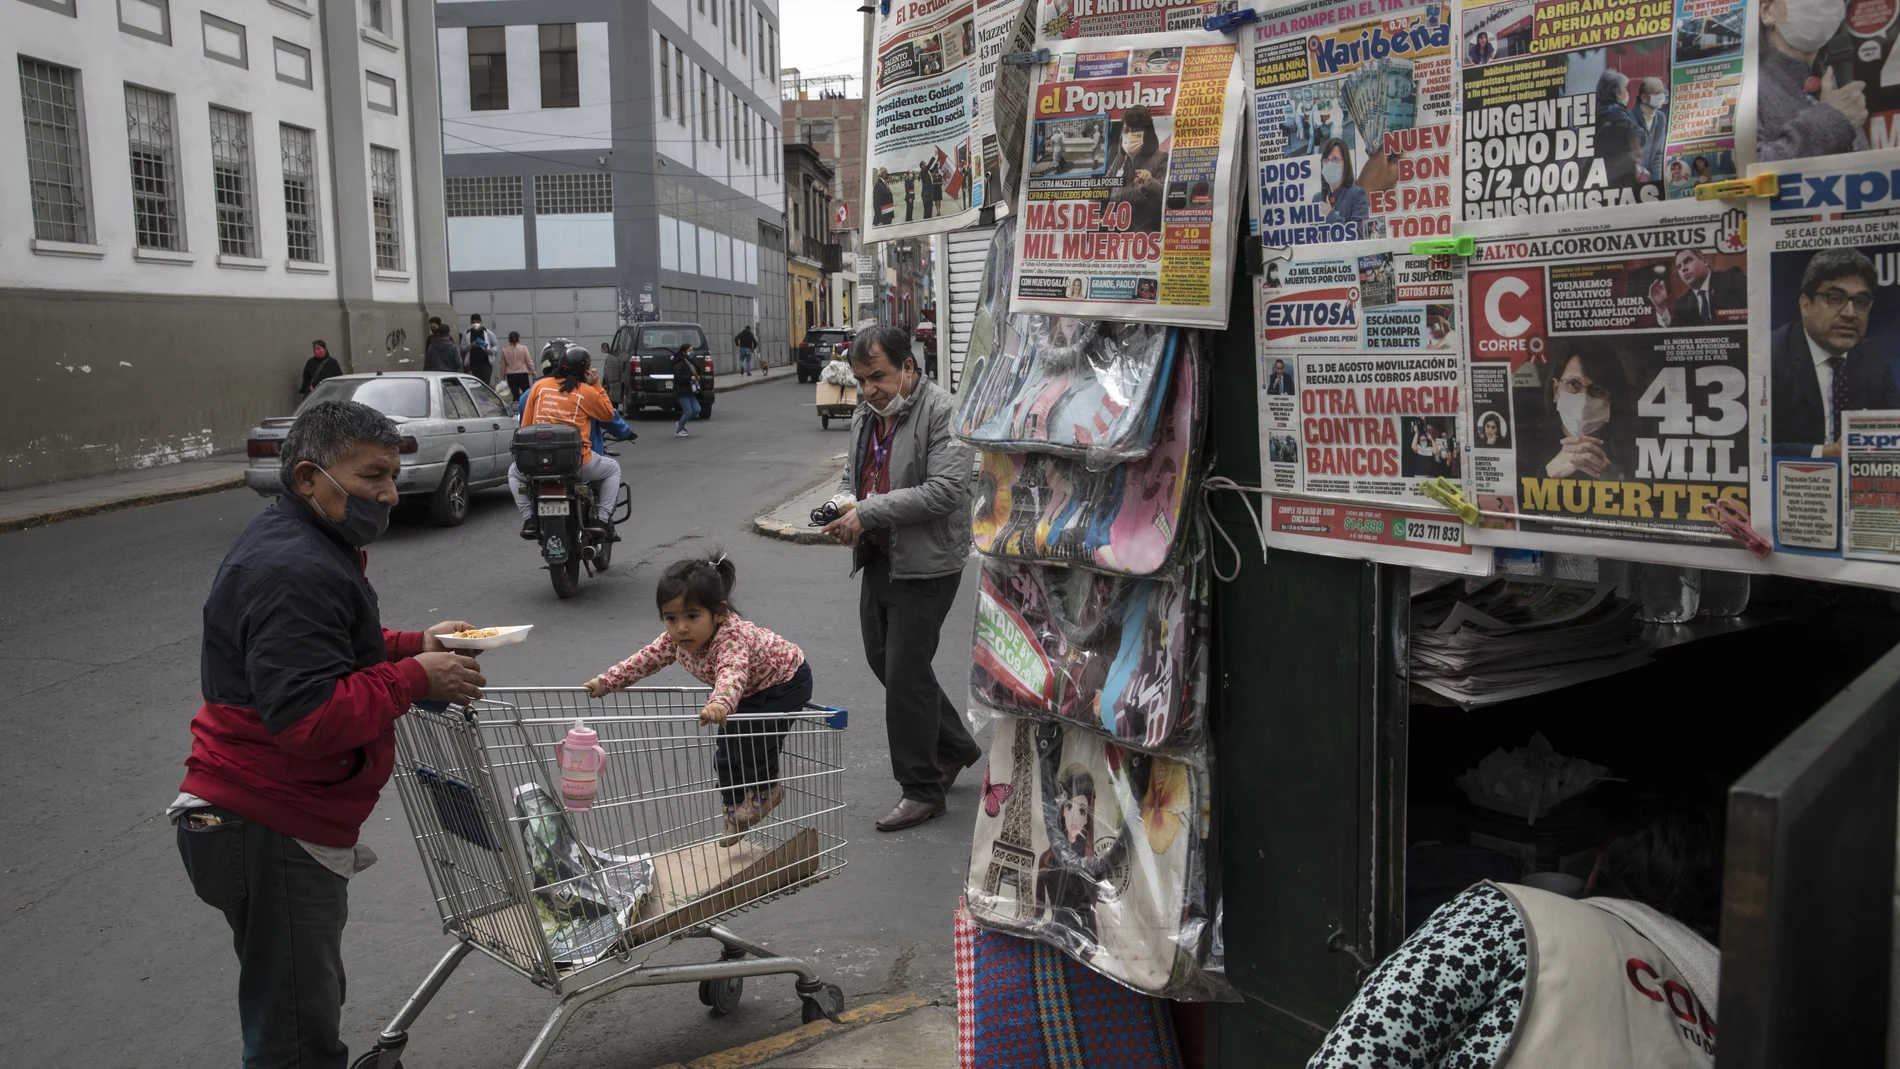 A man wearing a mask to curb the spread of the new coronavirus prepares to eat breakfast on a street in downtown Lima, Peru, Thursday, July 30, 2020. (AP Photo/Rodrigo Abd)